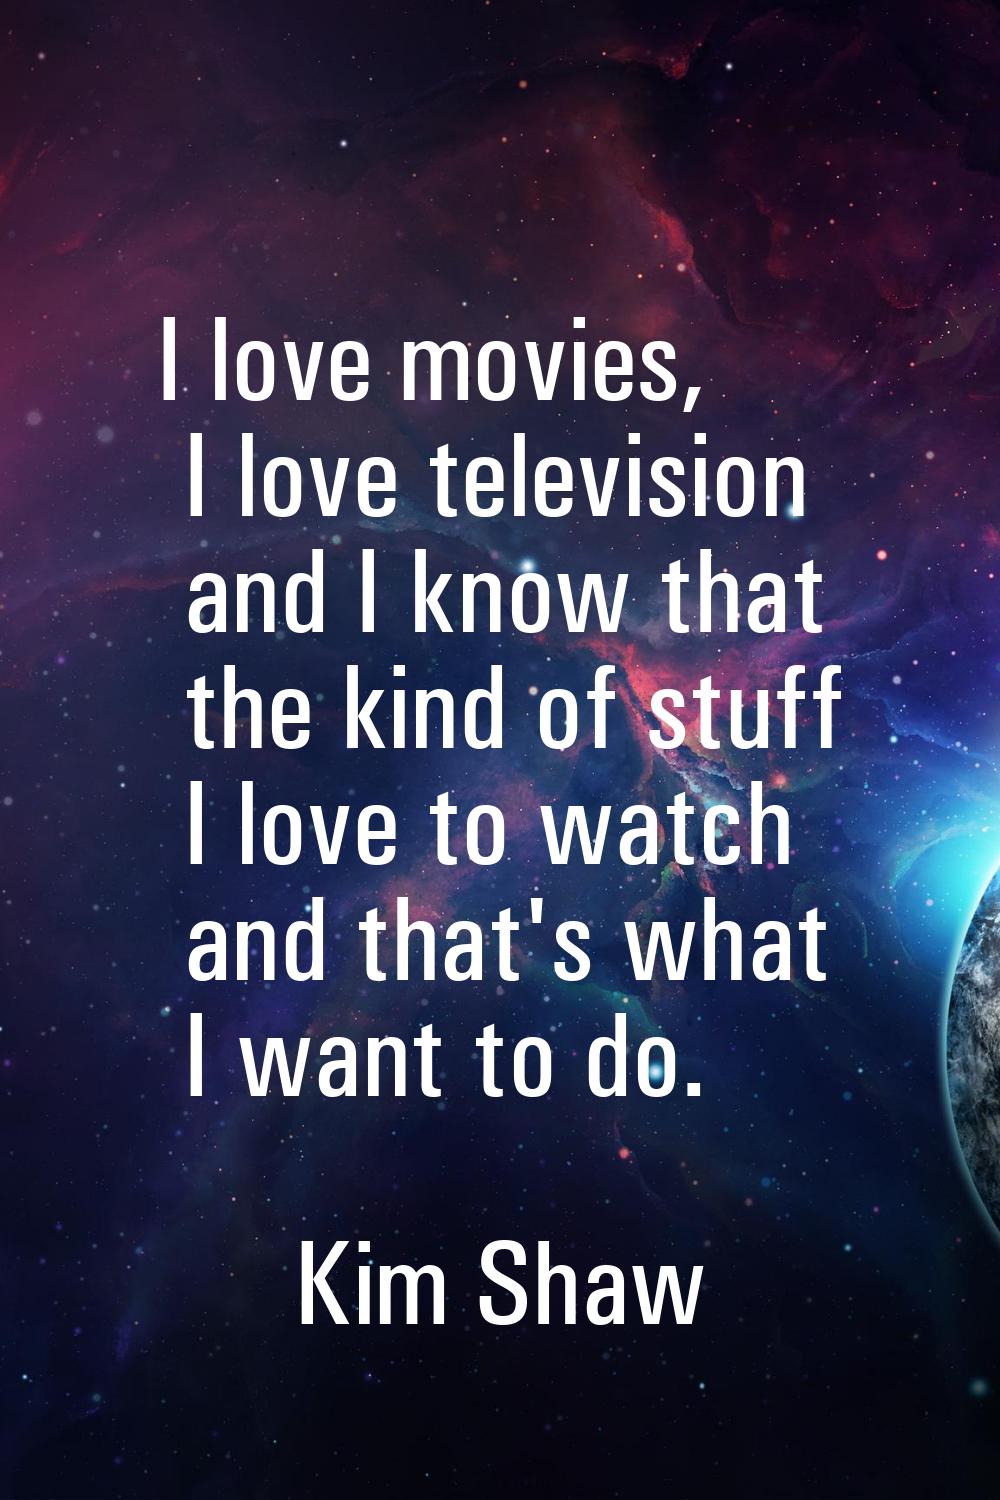 I love movies, I love television and I know that the kind of stuff I love to watch and that's what 